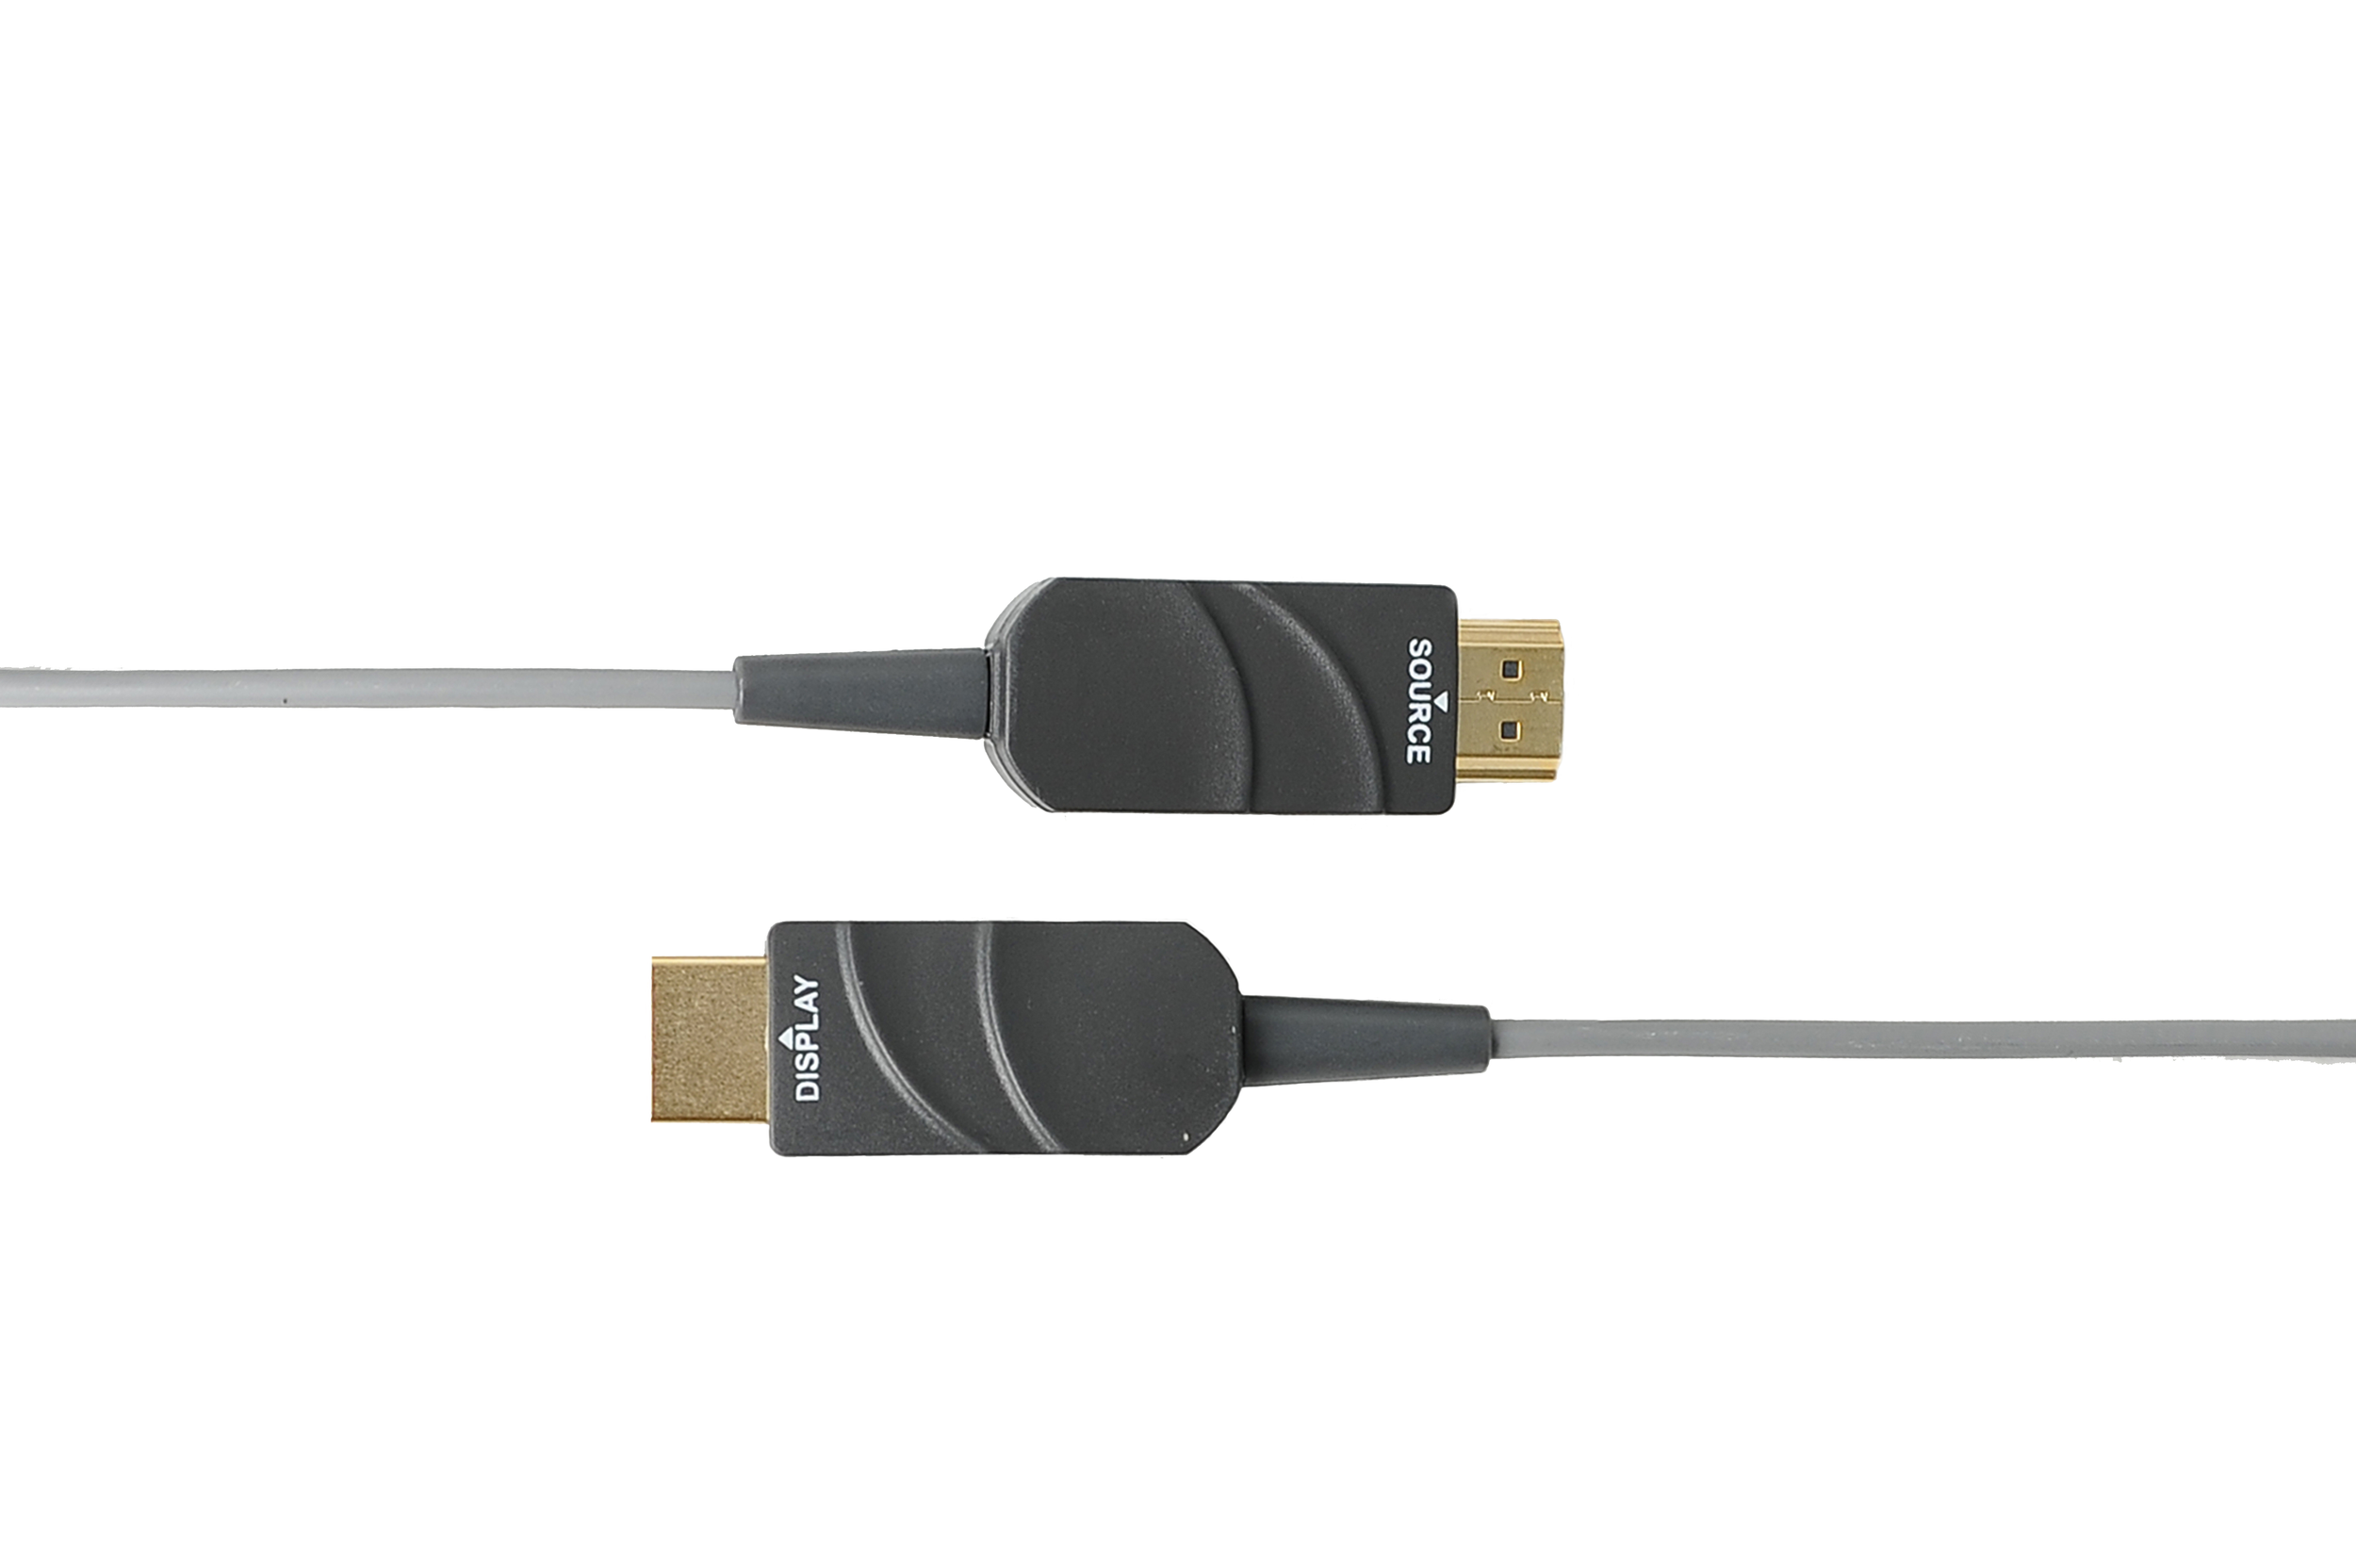 LMH2-N; HDMI 2.0 Active Optical Cable (Copy)